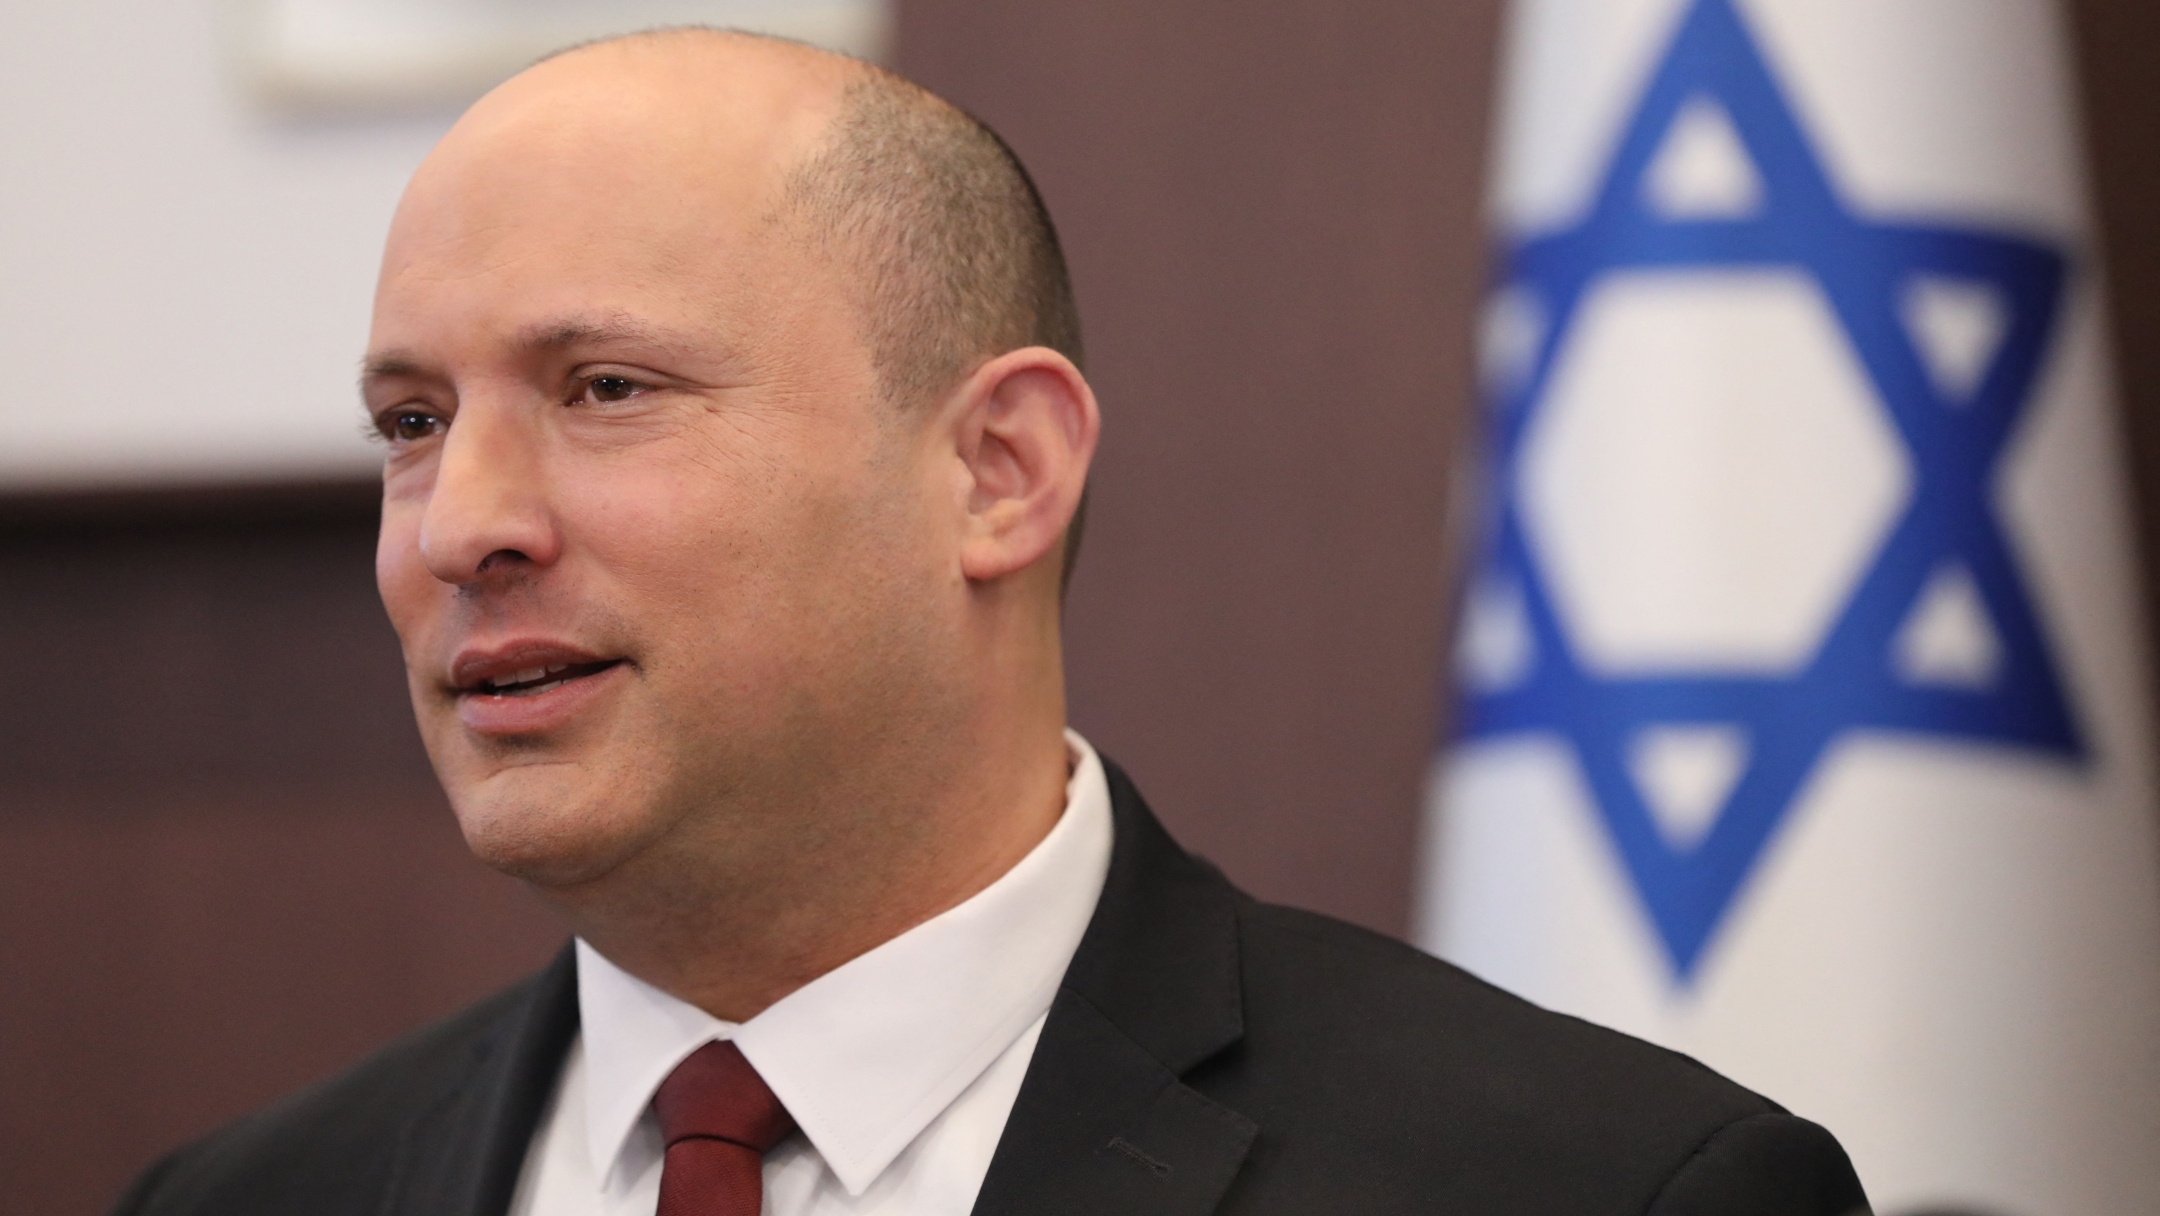 Israeli Prime Minister Naftali Bennett attends a cabinet meeting at the Prime Minister’s office in Jerusalem, March 27, 2022. (Abir Sultan/Pool/AFP via Getty Images)